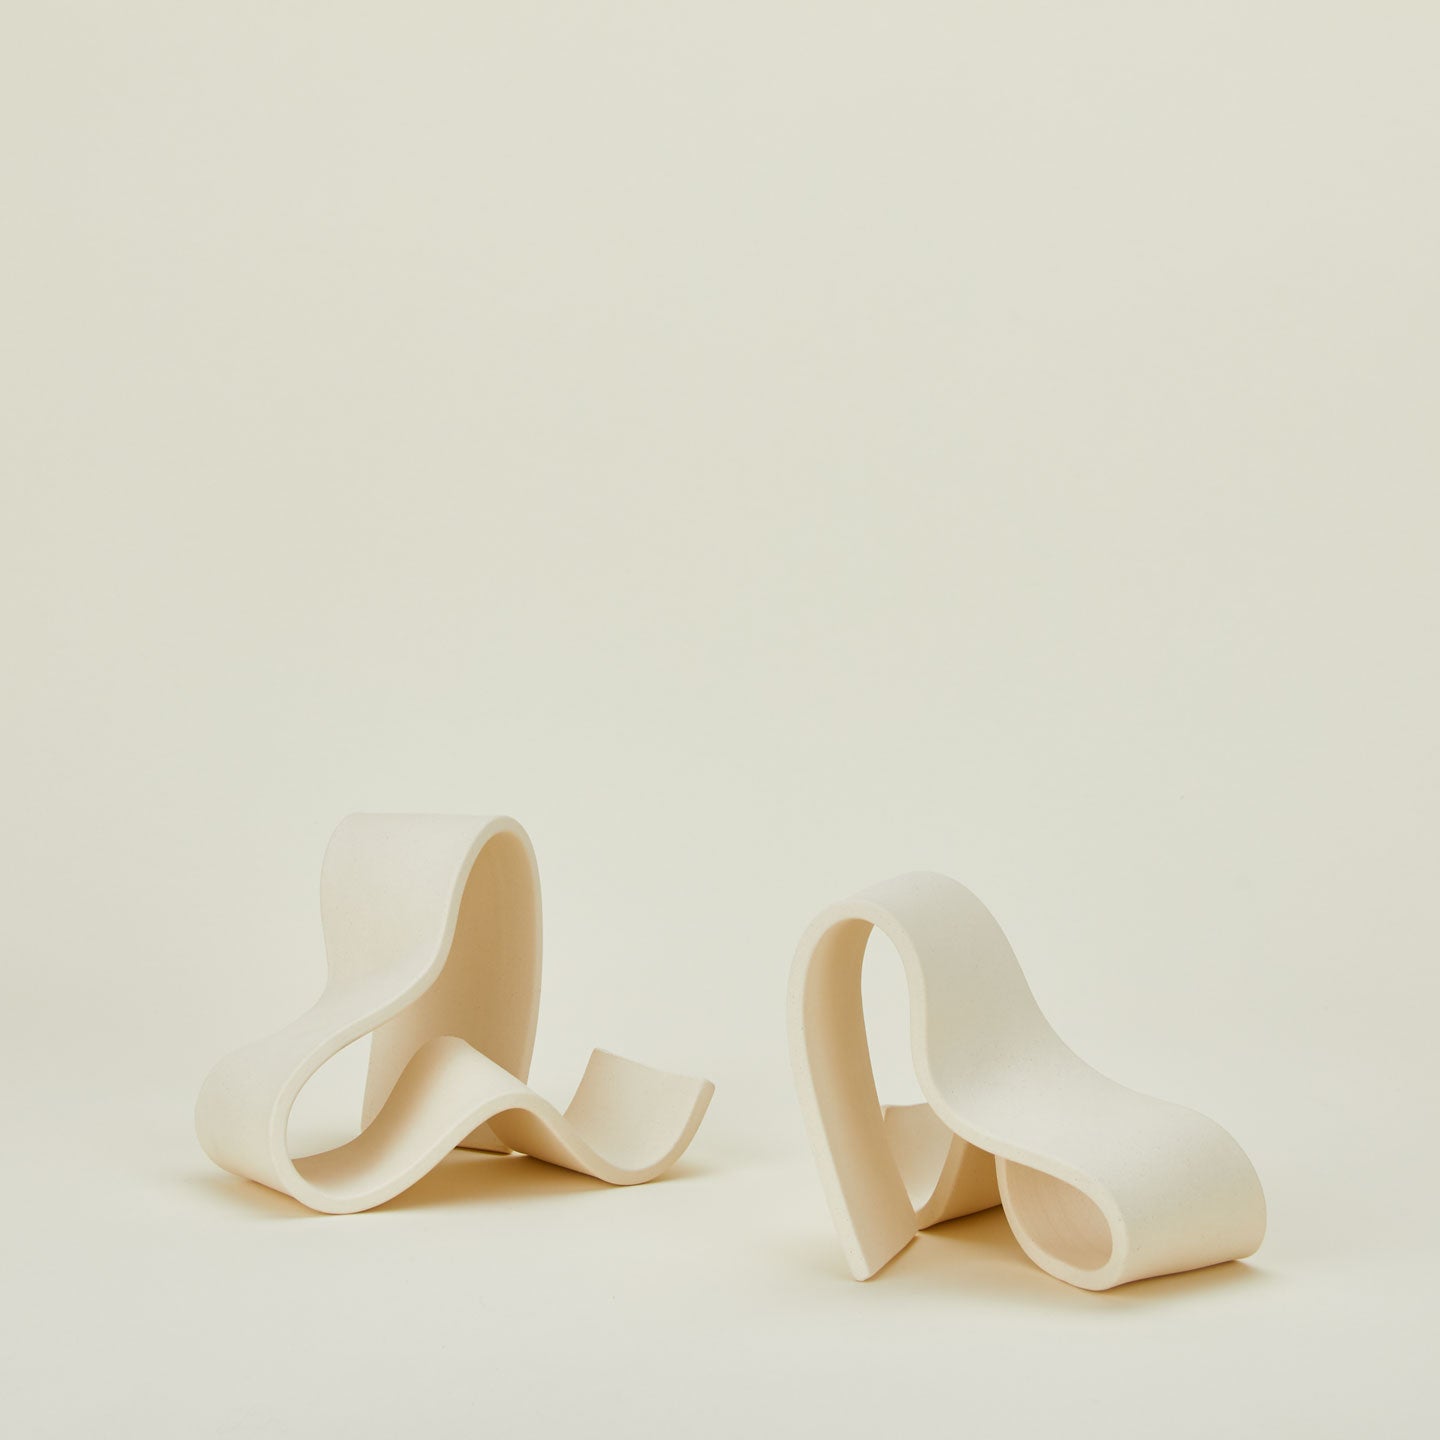 Organically shaped neutral stoneware bookends.